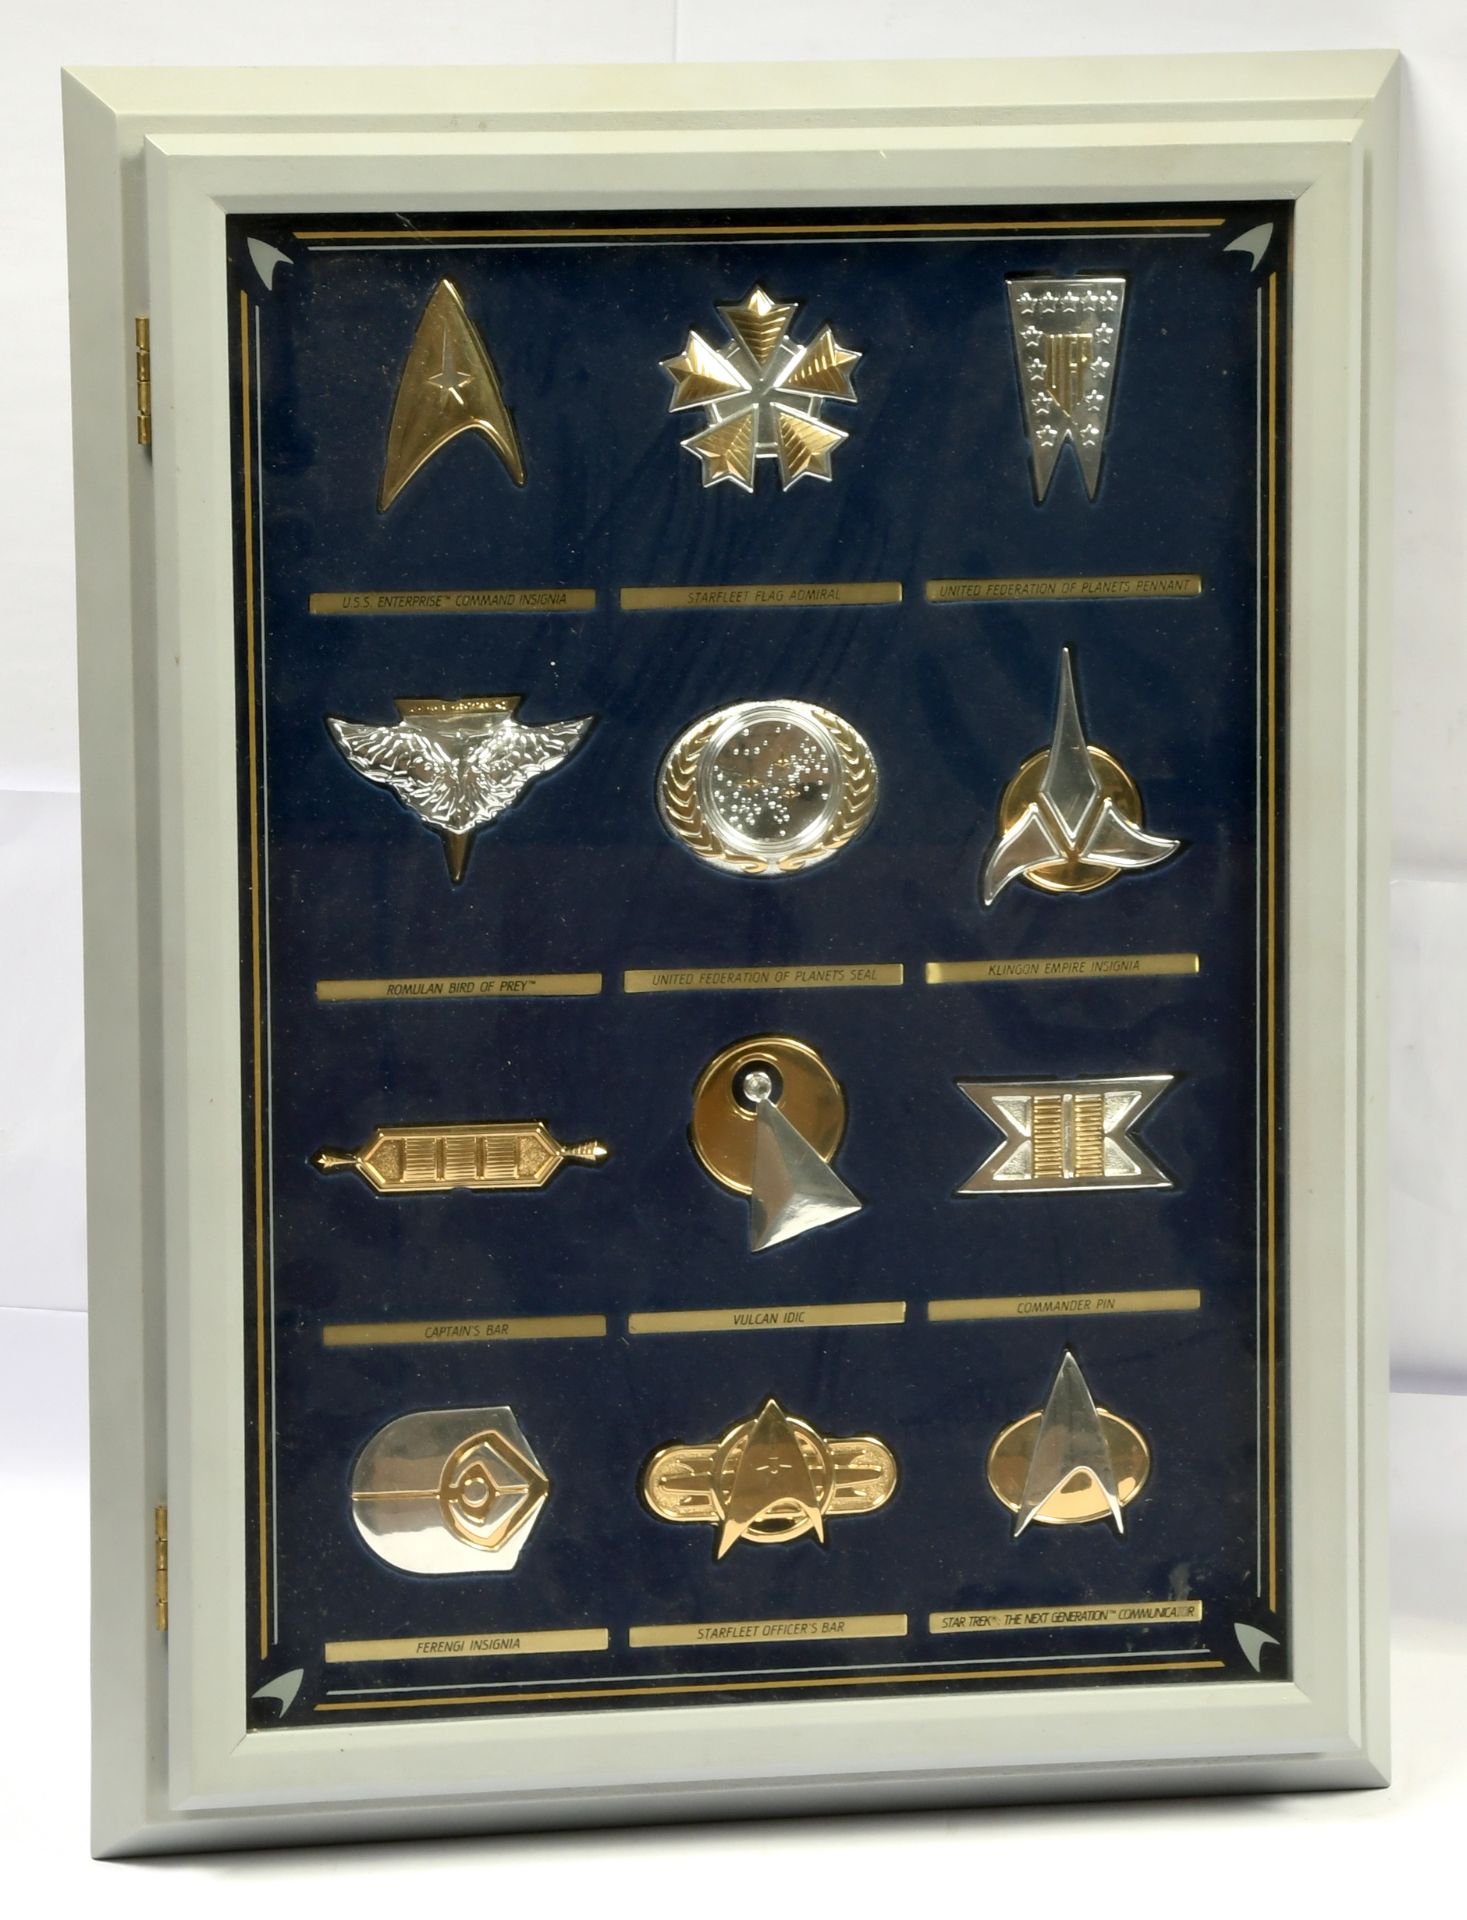 Franklin Mint Star Trek Official Insignia Badges set of 12 with display case